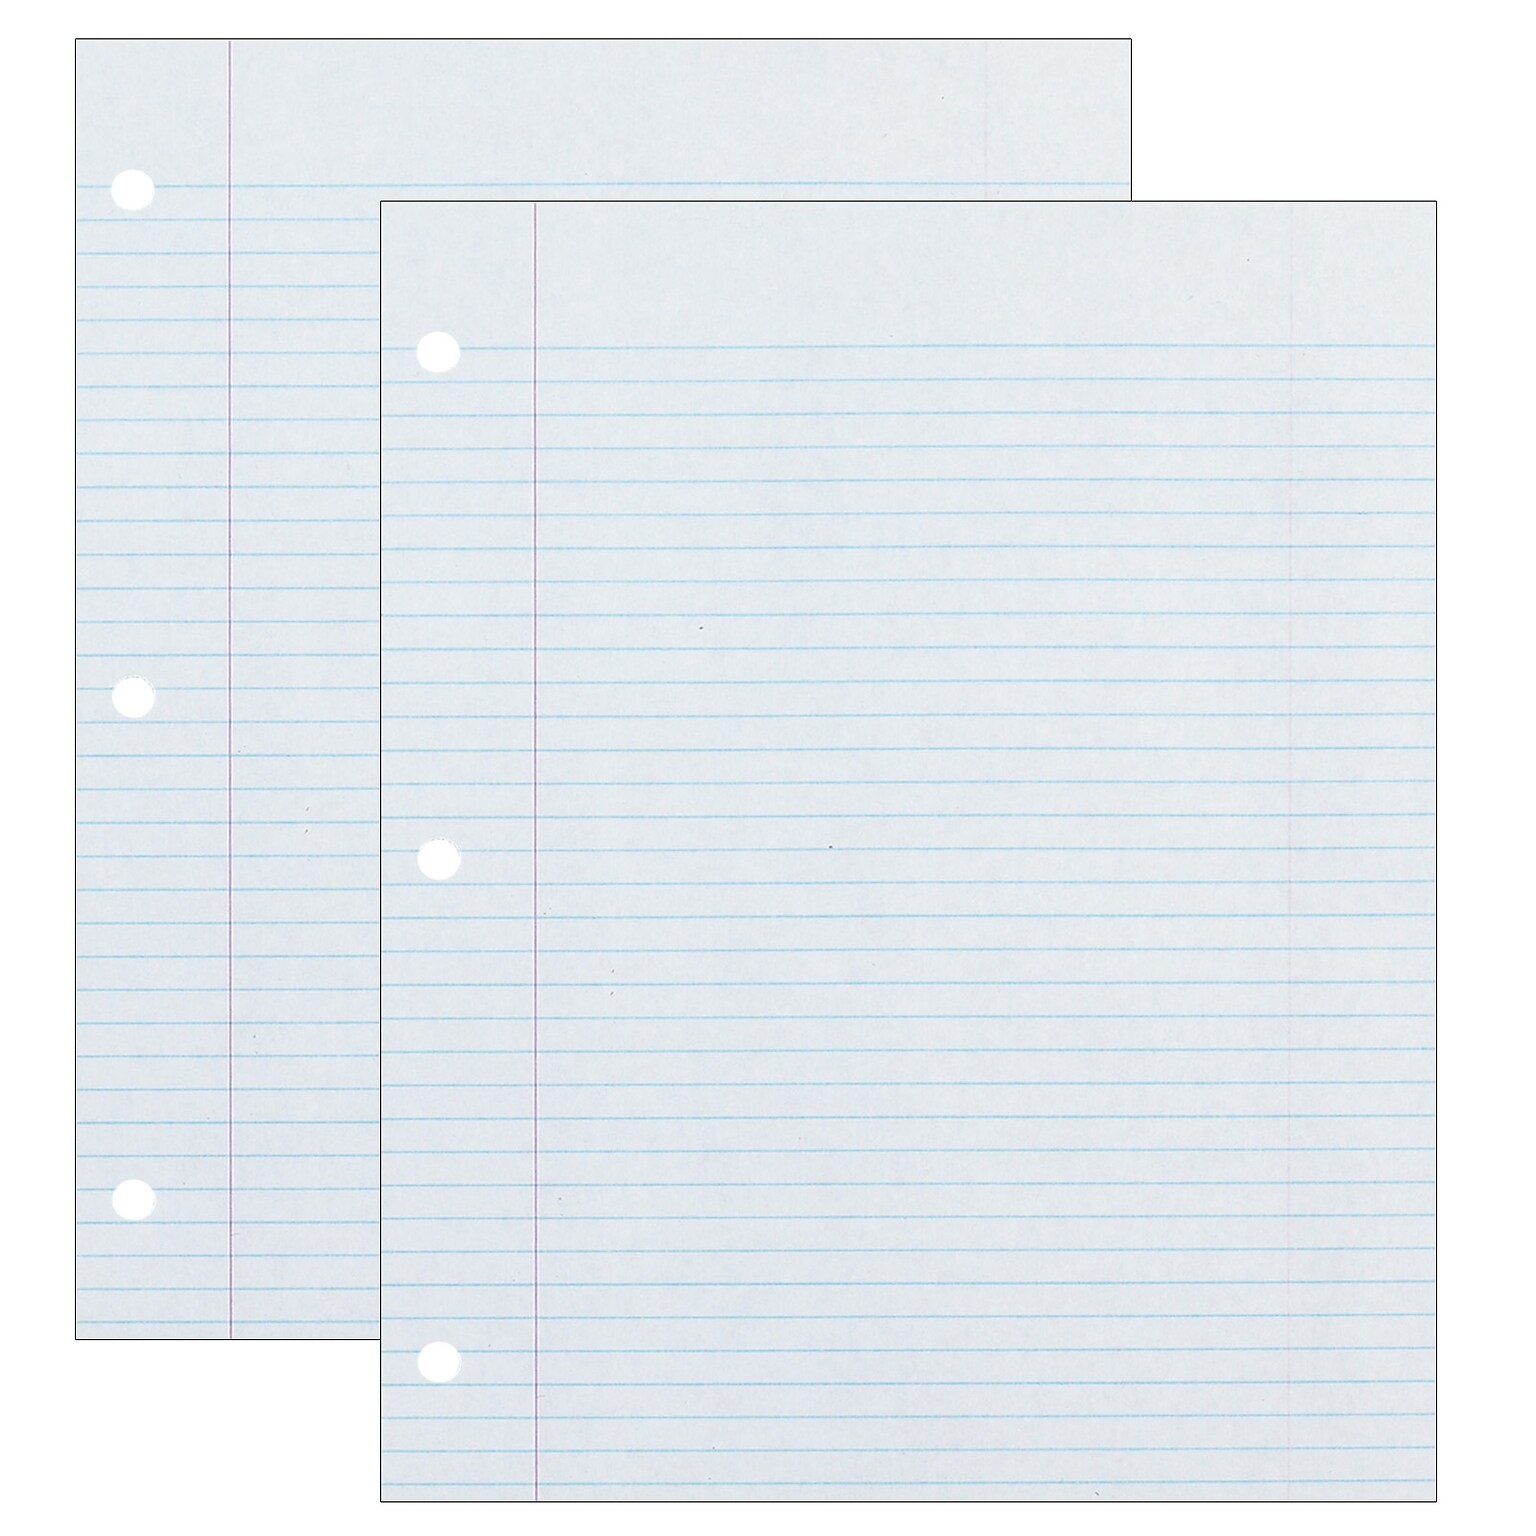 Ecology Recycled College Ruled Filler Paper, 8.5 x 11, White, 500 Sheets/Pack, 2 Packs (PAC2417-2)